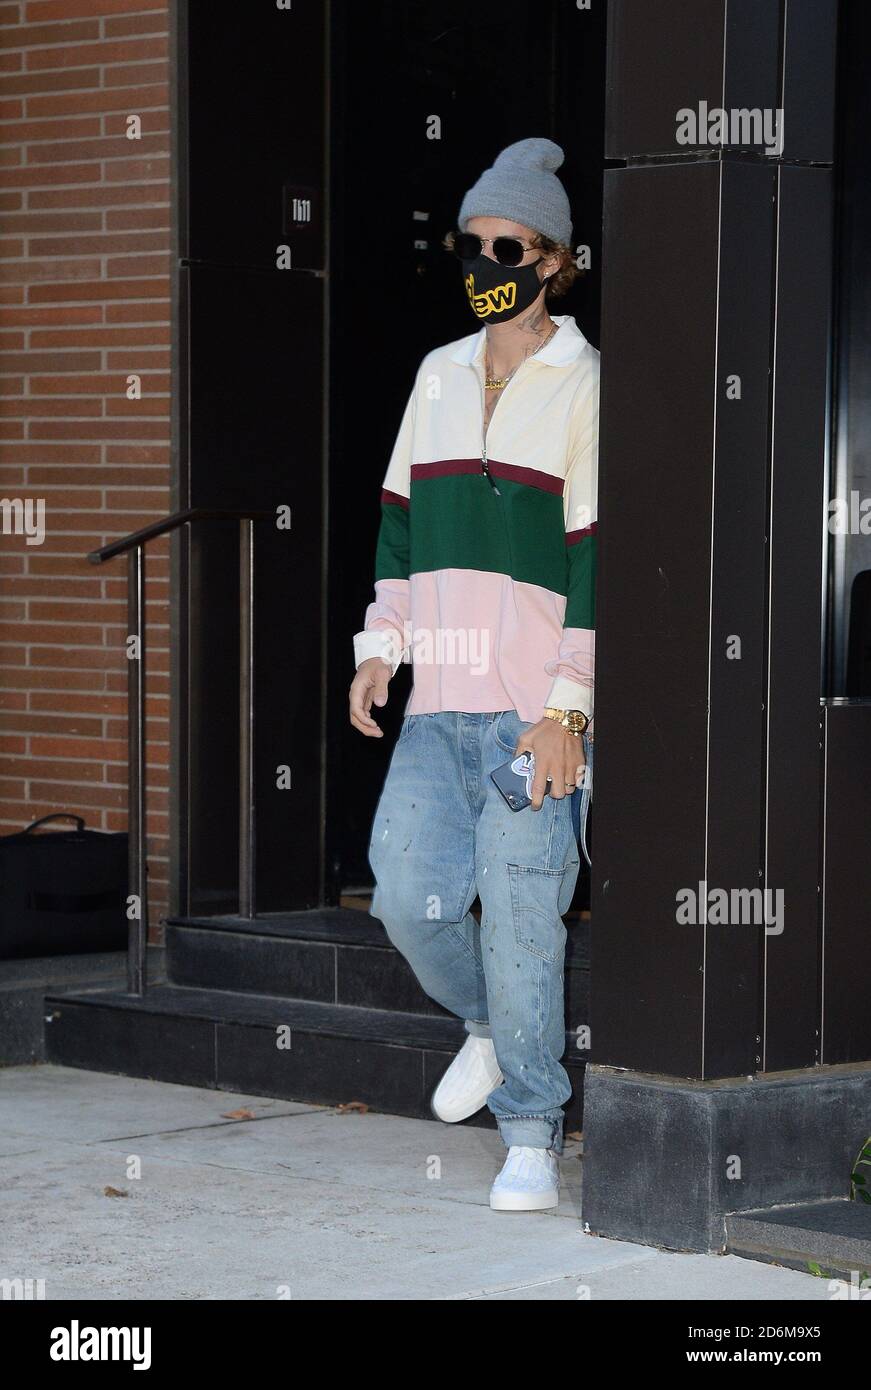 New York, NY, États-Unis. 17 octobre 2020. Justin Bieber sort and about for Celebrity candids - SAT, New York, NY 17 octobre 2020. Crédit : Kristin Callahan/Everett Collection/Alay Live News Banque D'Images